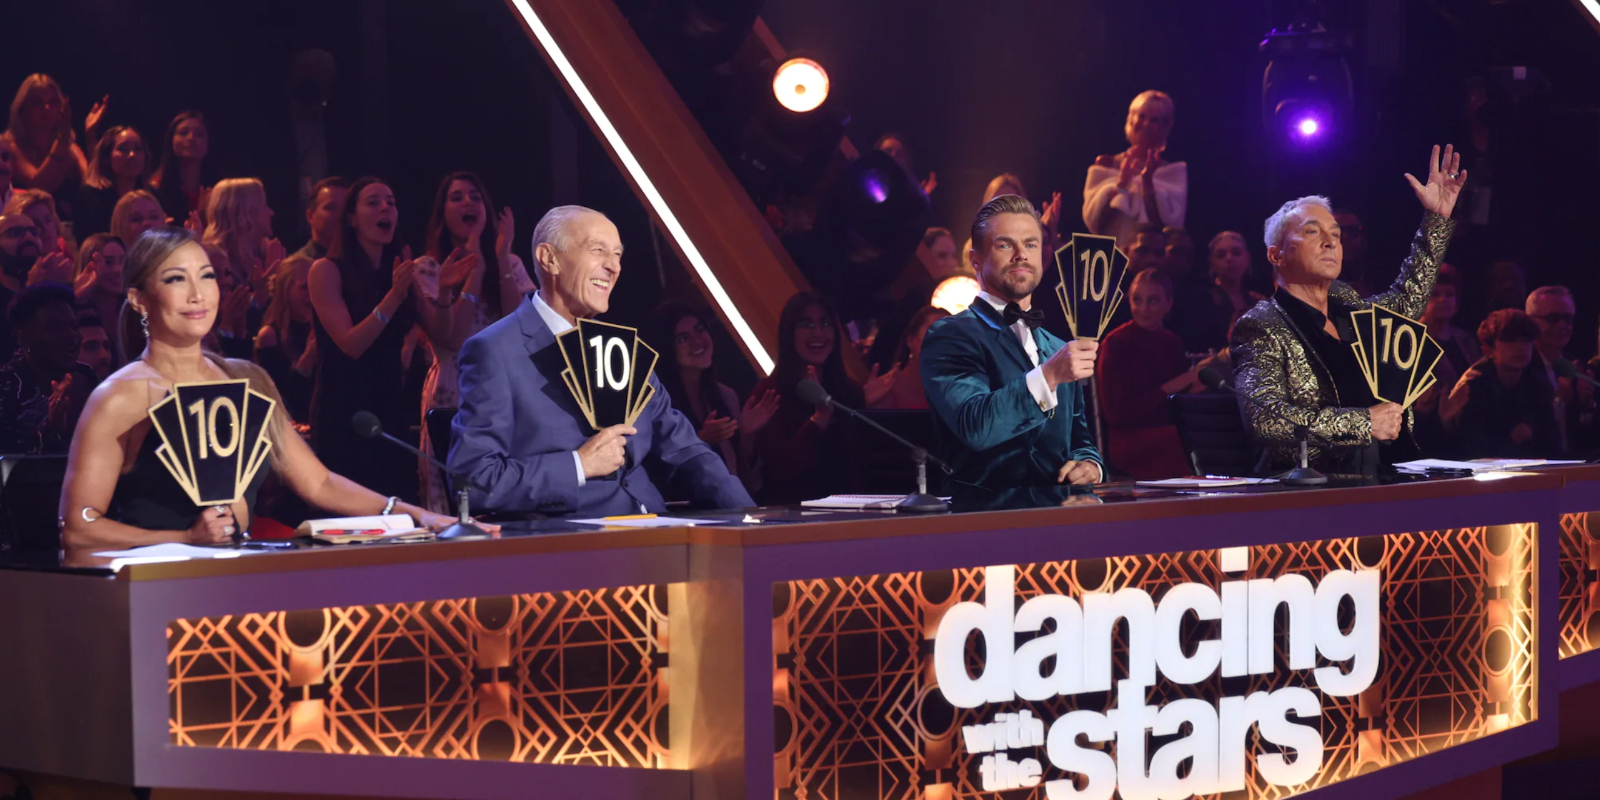 Carrie Ann Inaba, Len Goodman, Derek Hough and Bruno Tonioli seated behind the judges table holding paddles during 'DWTS' season 31 semifinals episode.